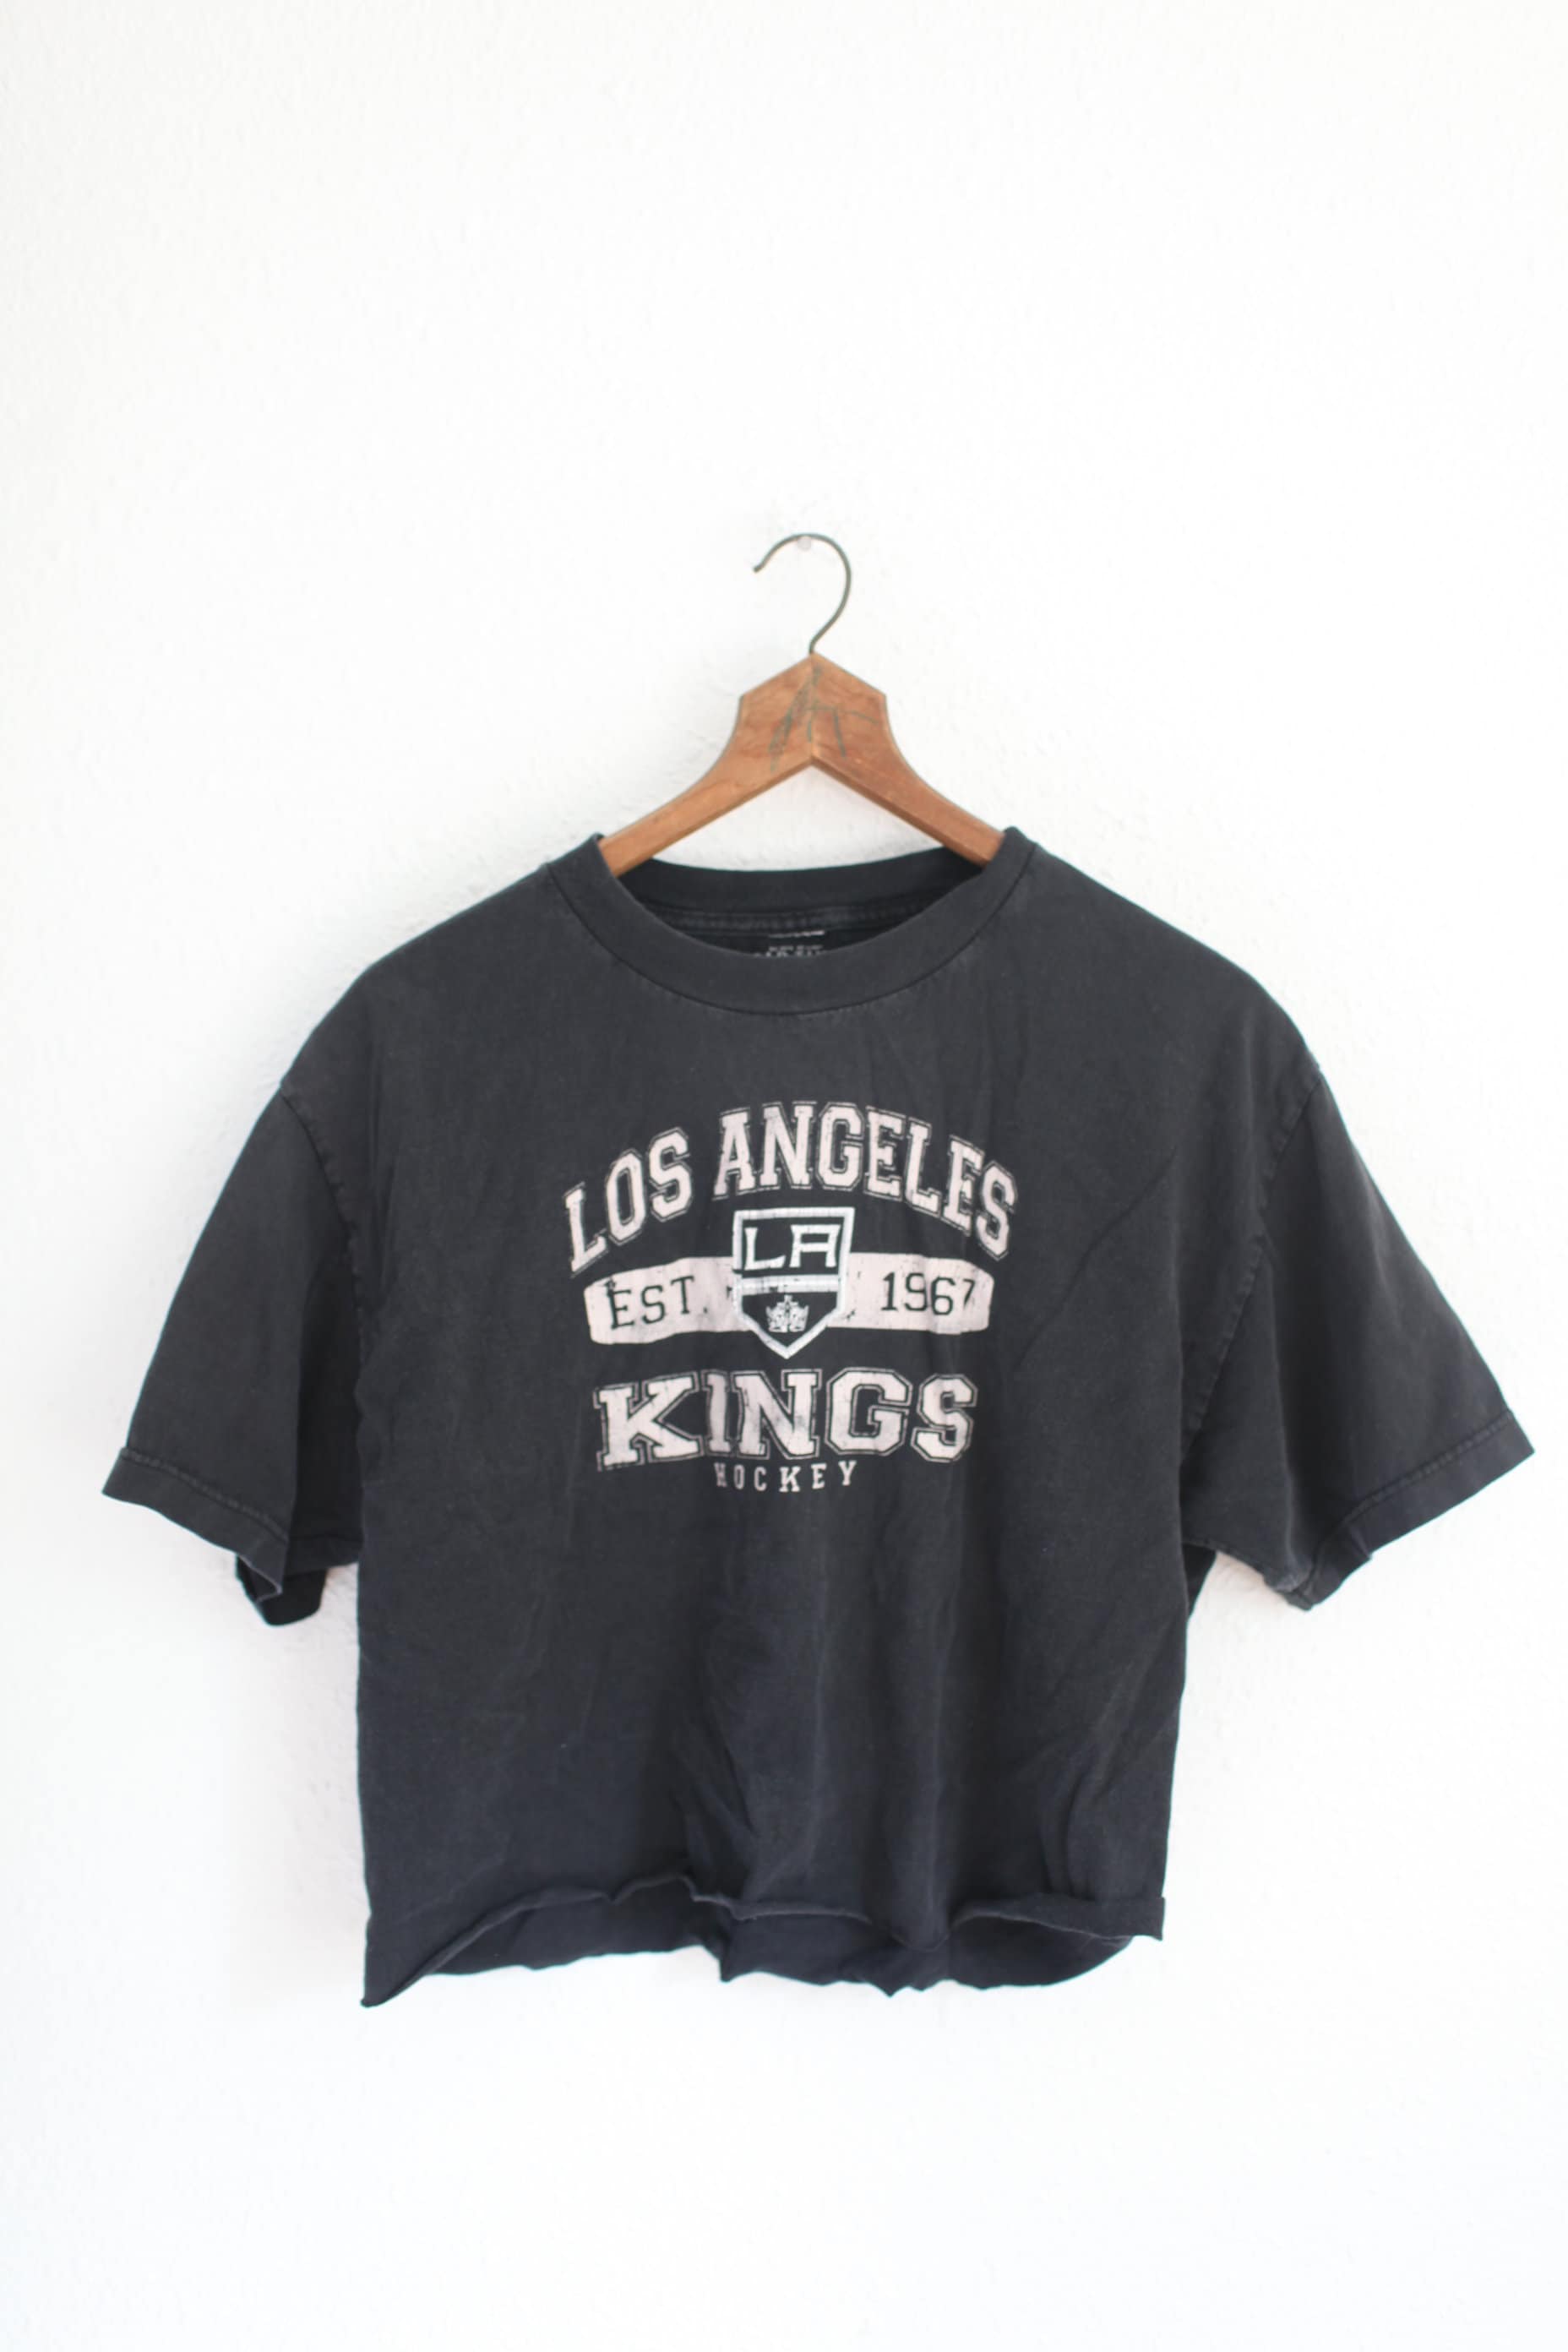 Vintage LA Kings 1993 t-shirt – For All To Envy